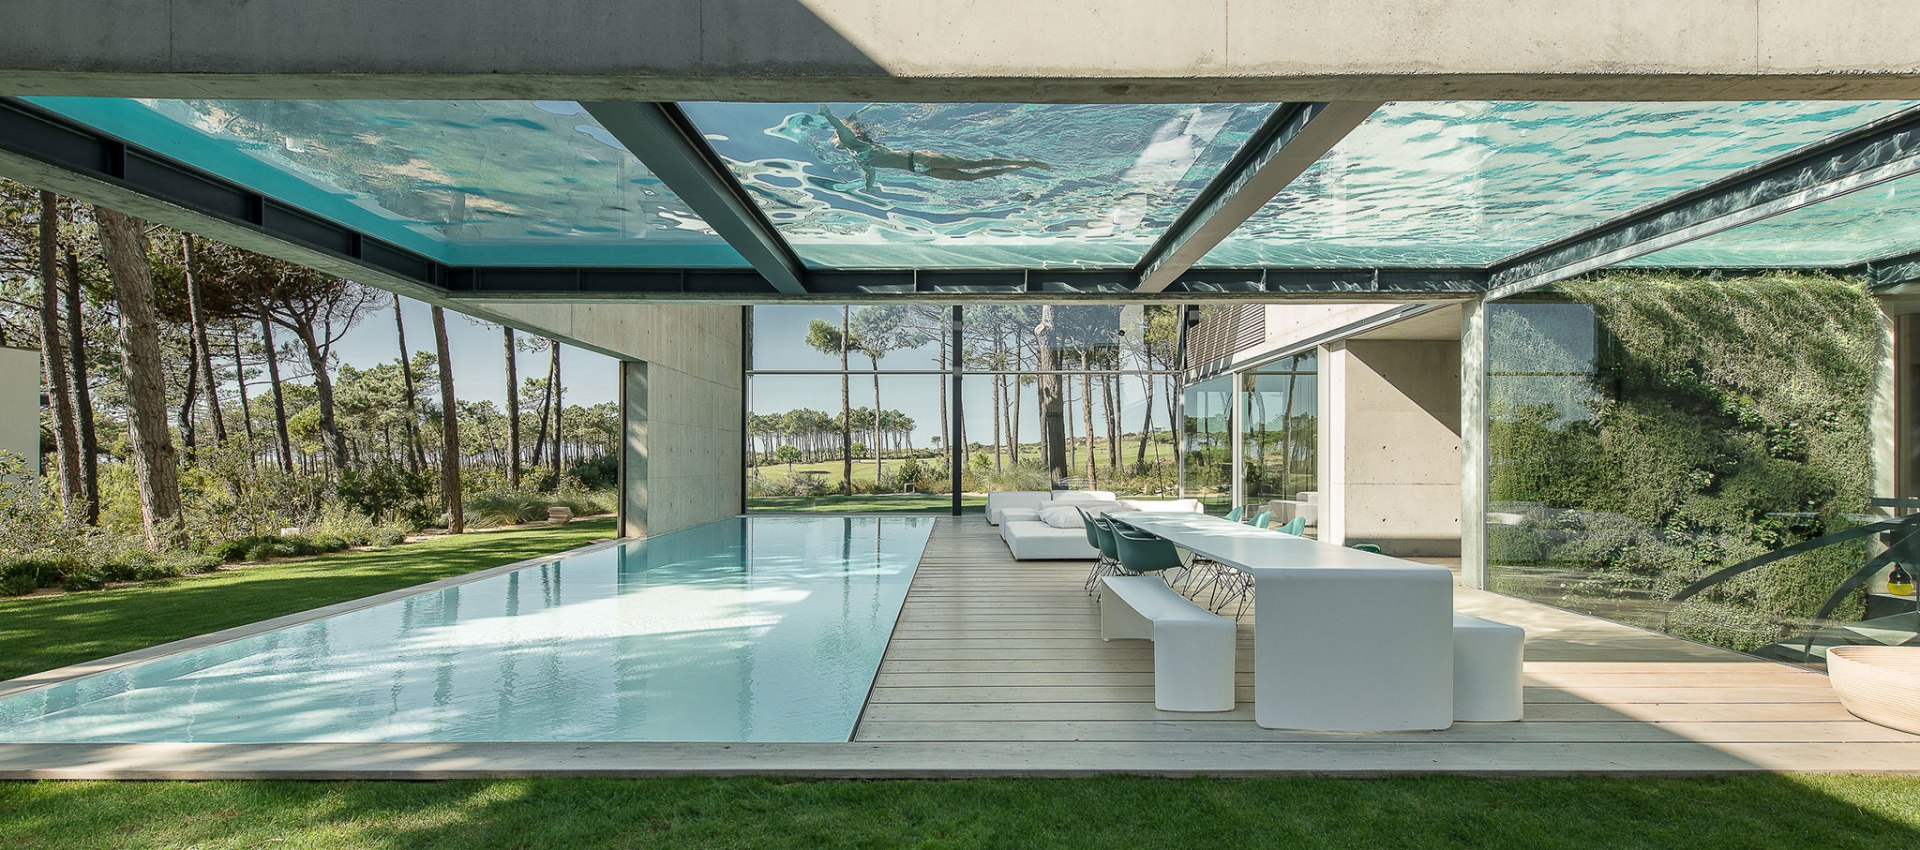 Pool Above Swimming Pool The Wall House By Guedes Cruz Arquitectos The Strength Of Architecture From 1998